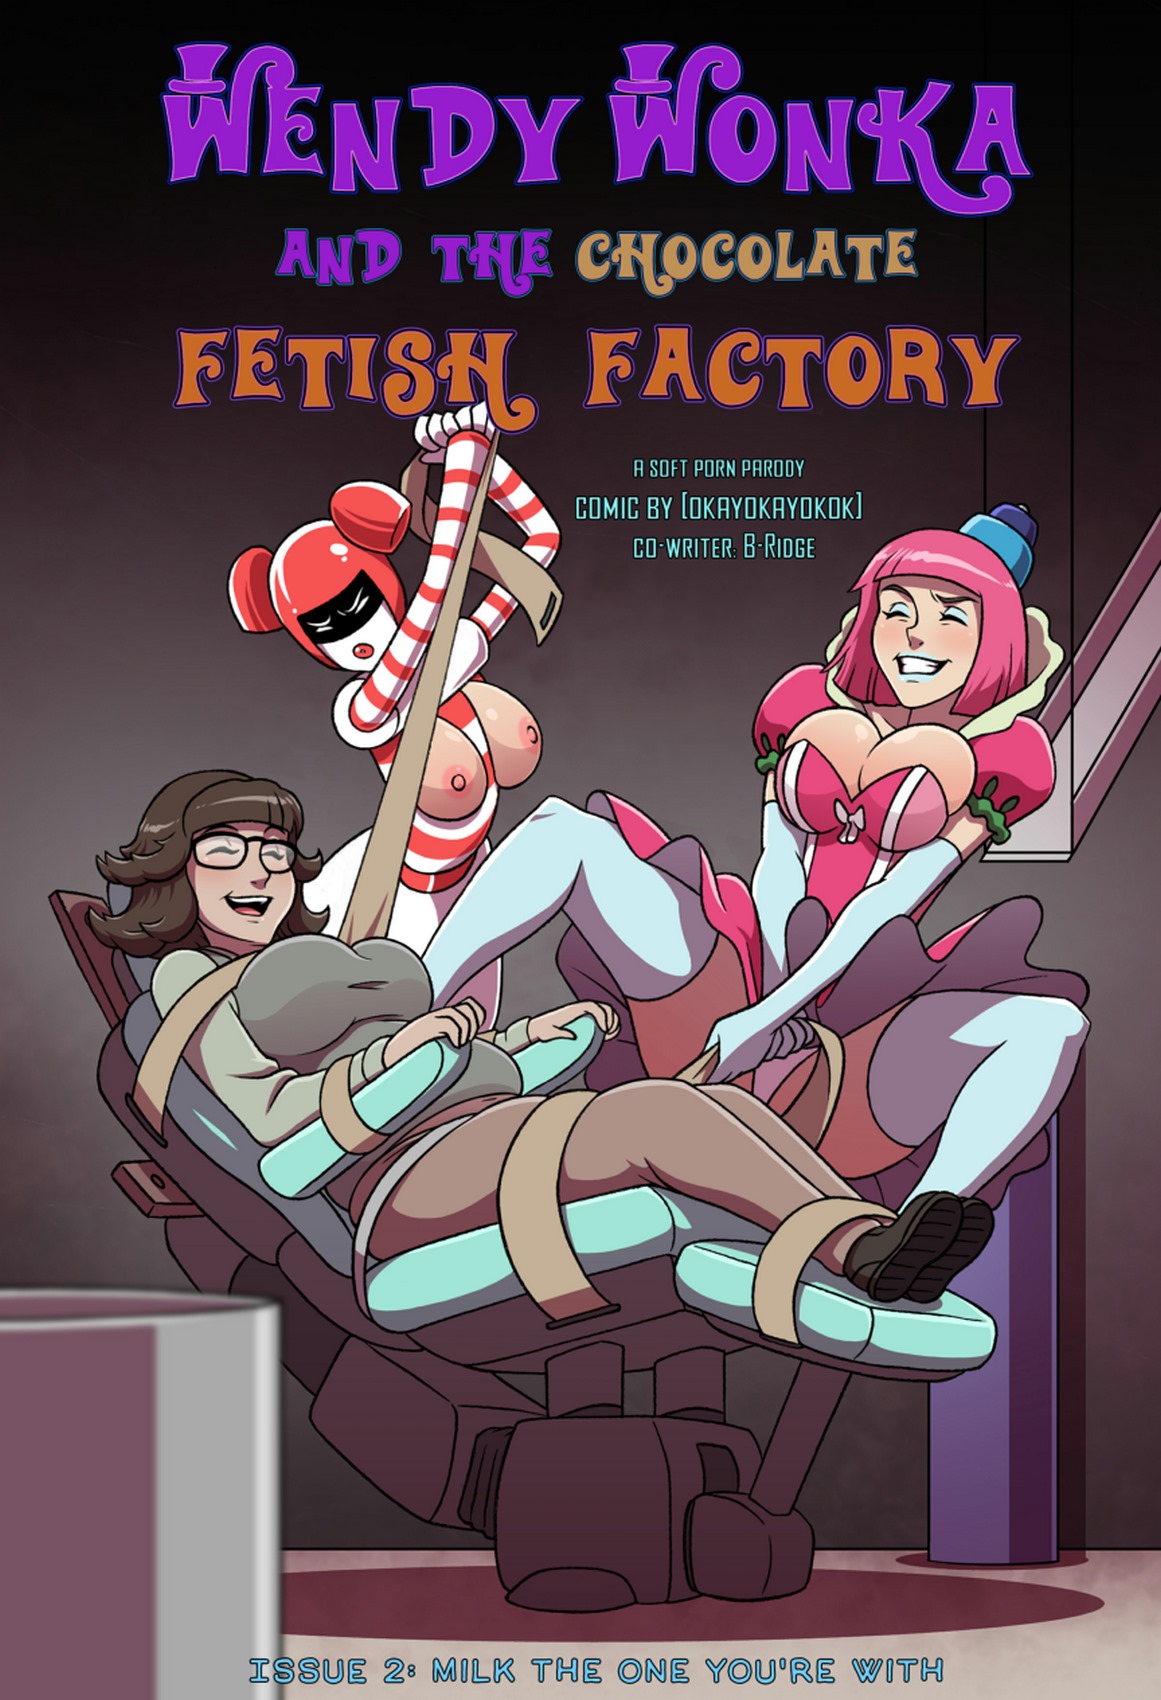 Wendy Wonka and the Chocolate Fetish Factory - Chapter 2 Issue 2.